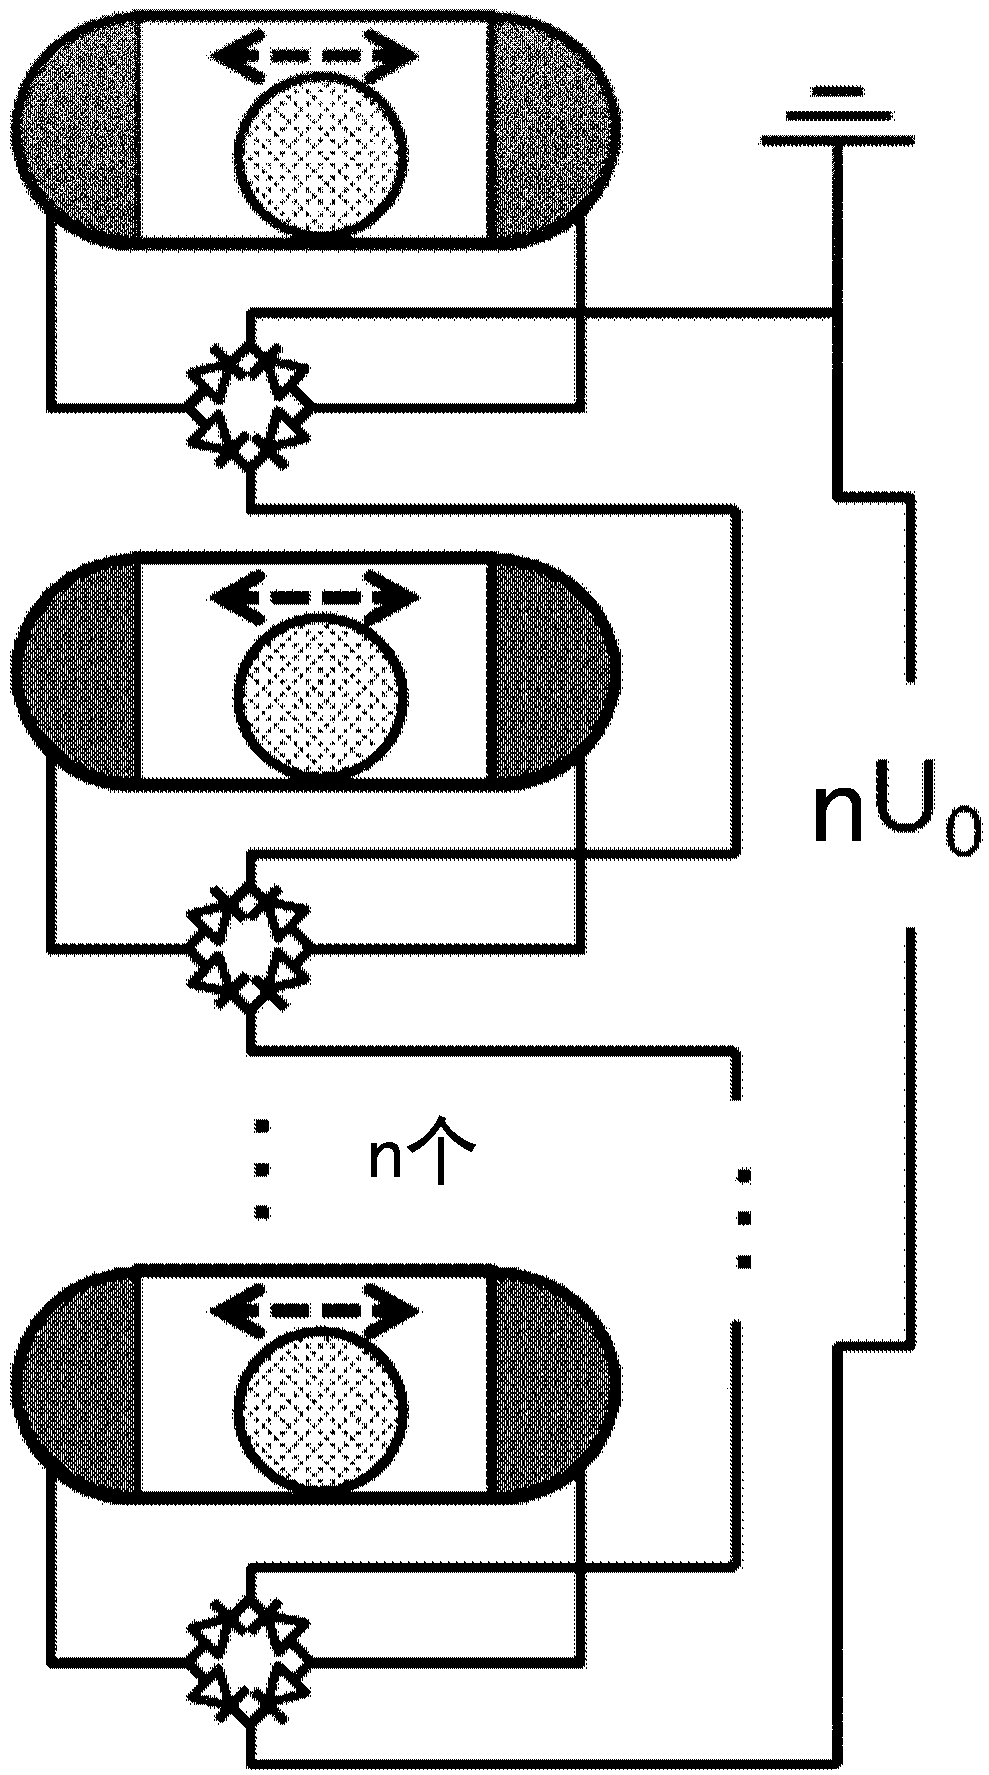 Capsule-type electret generator and energy supply device